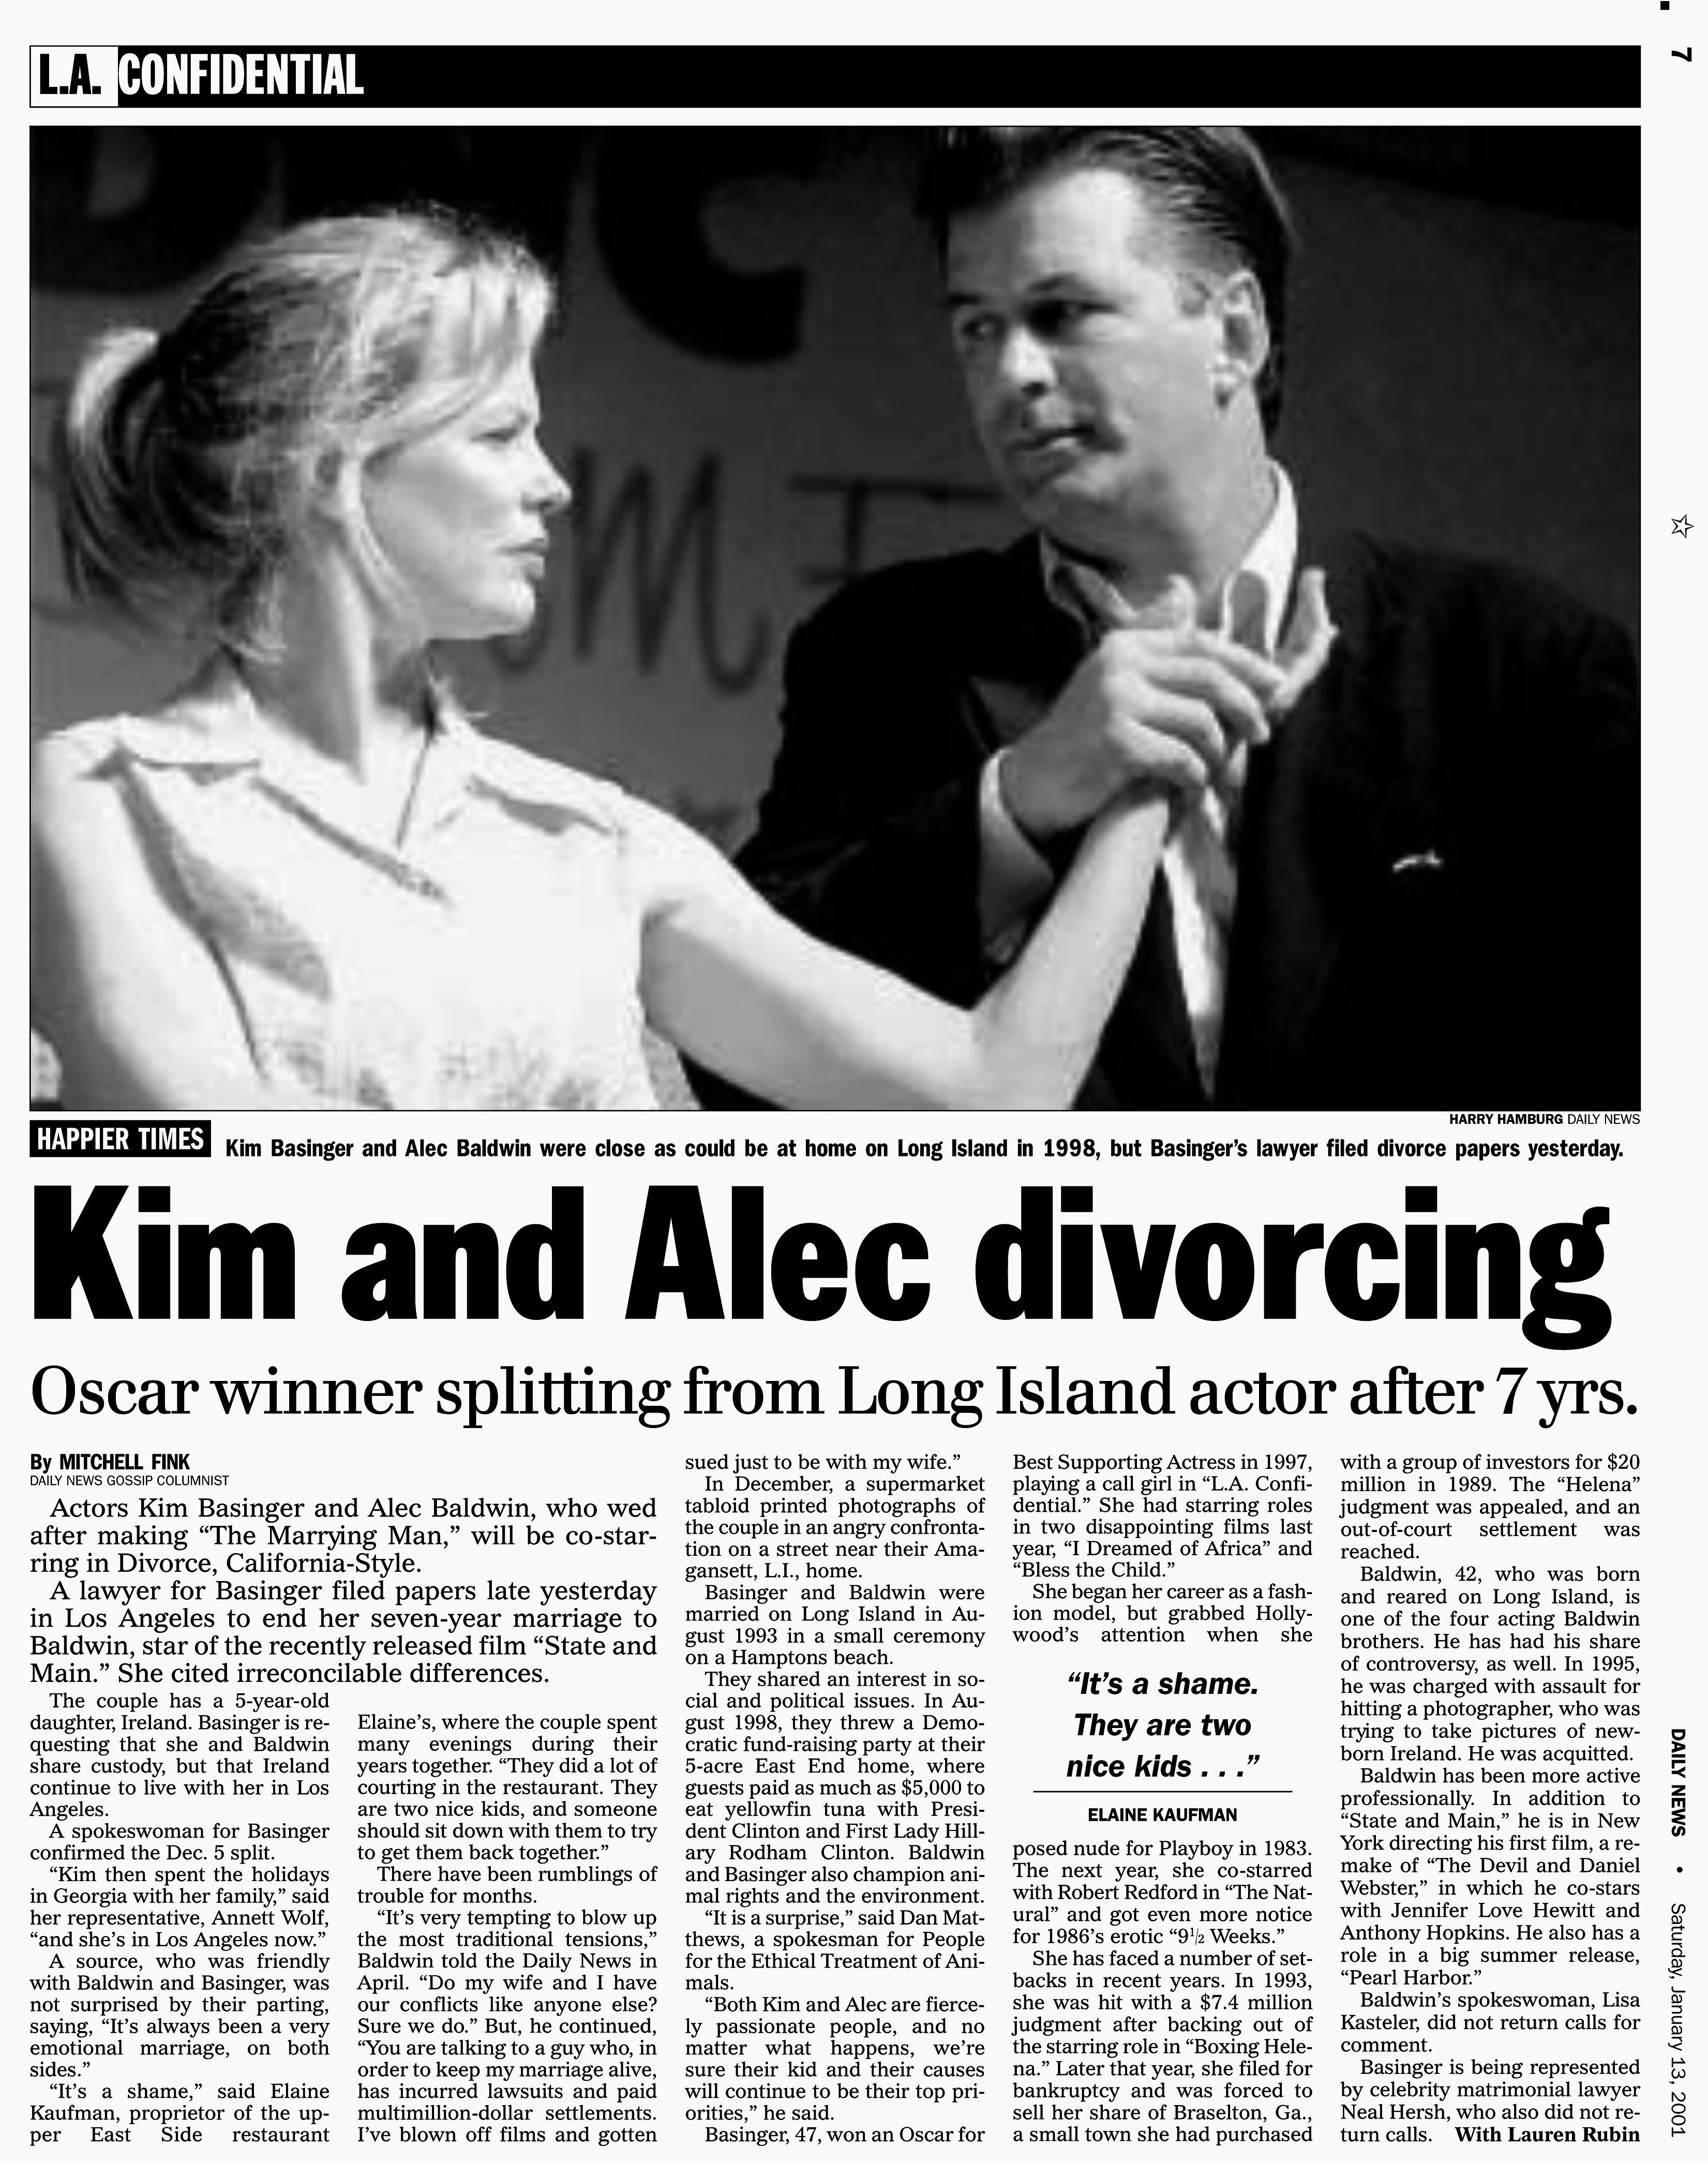  Headline: Kim Basinger and Alec Baldwin  divorcing -- Daily News page 7, January 13, 2001 | Source: Getty Images